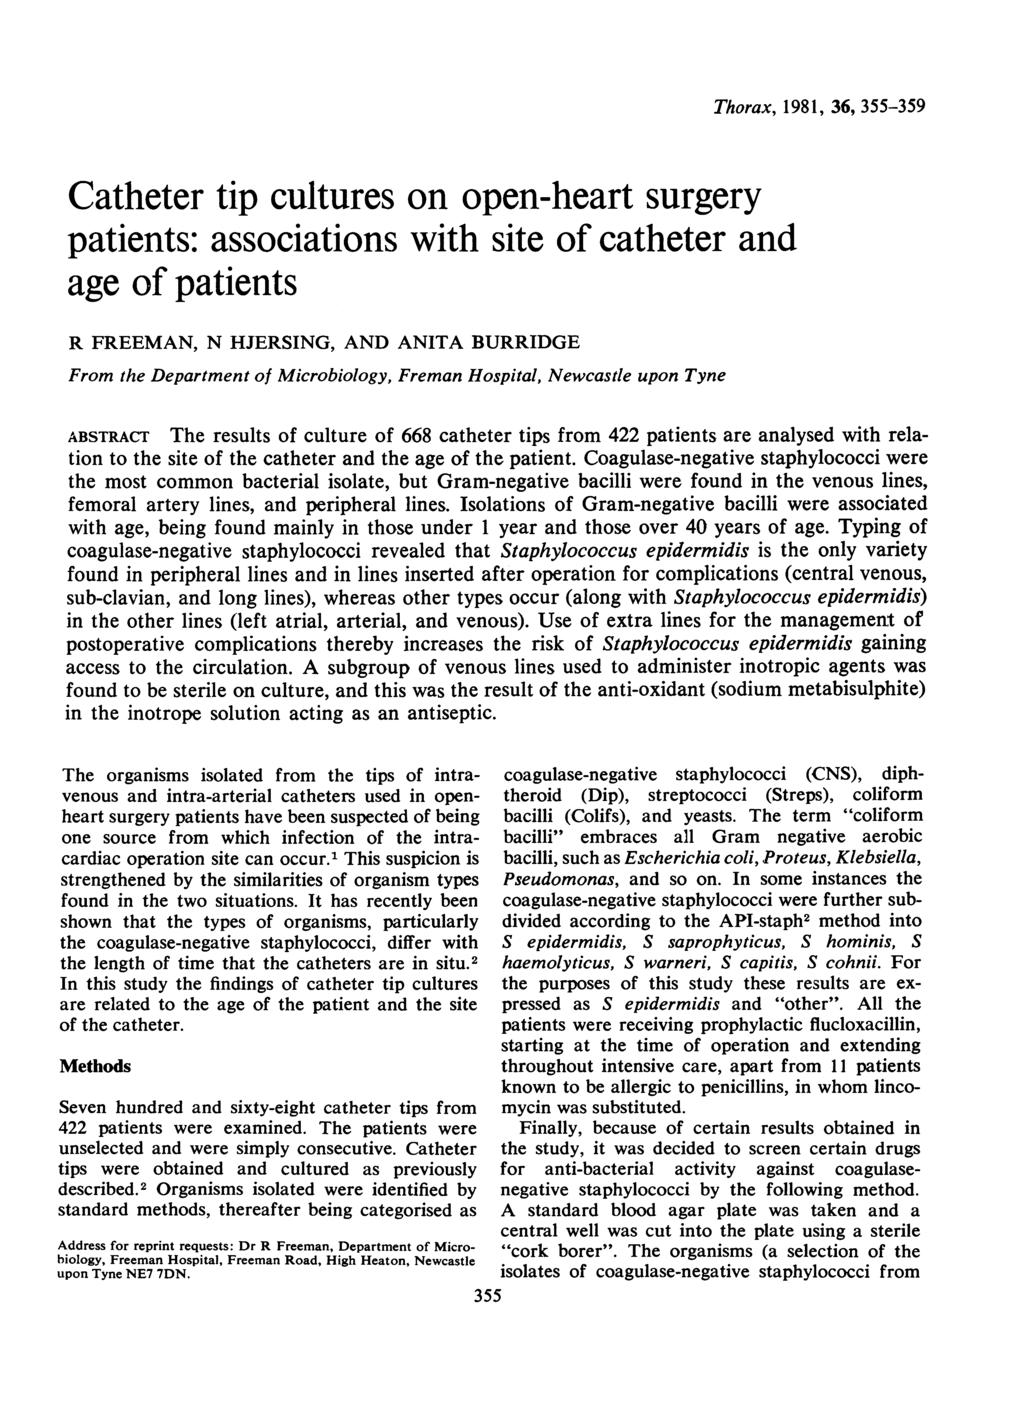 Catheter tip cultures on open-heart surgery patients: associations with site of catheter and age of patients R FREEMAN, N HJERSING, AND ANITA BURRIDGE From the Department of Microbiology, Freman